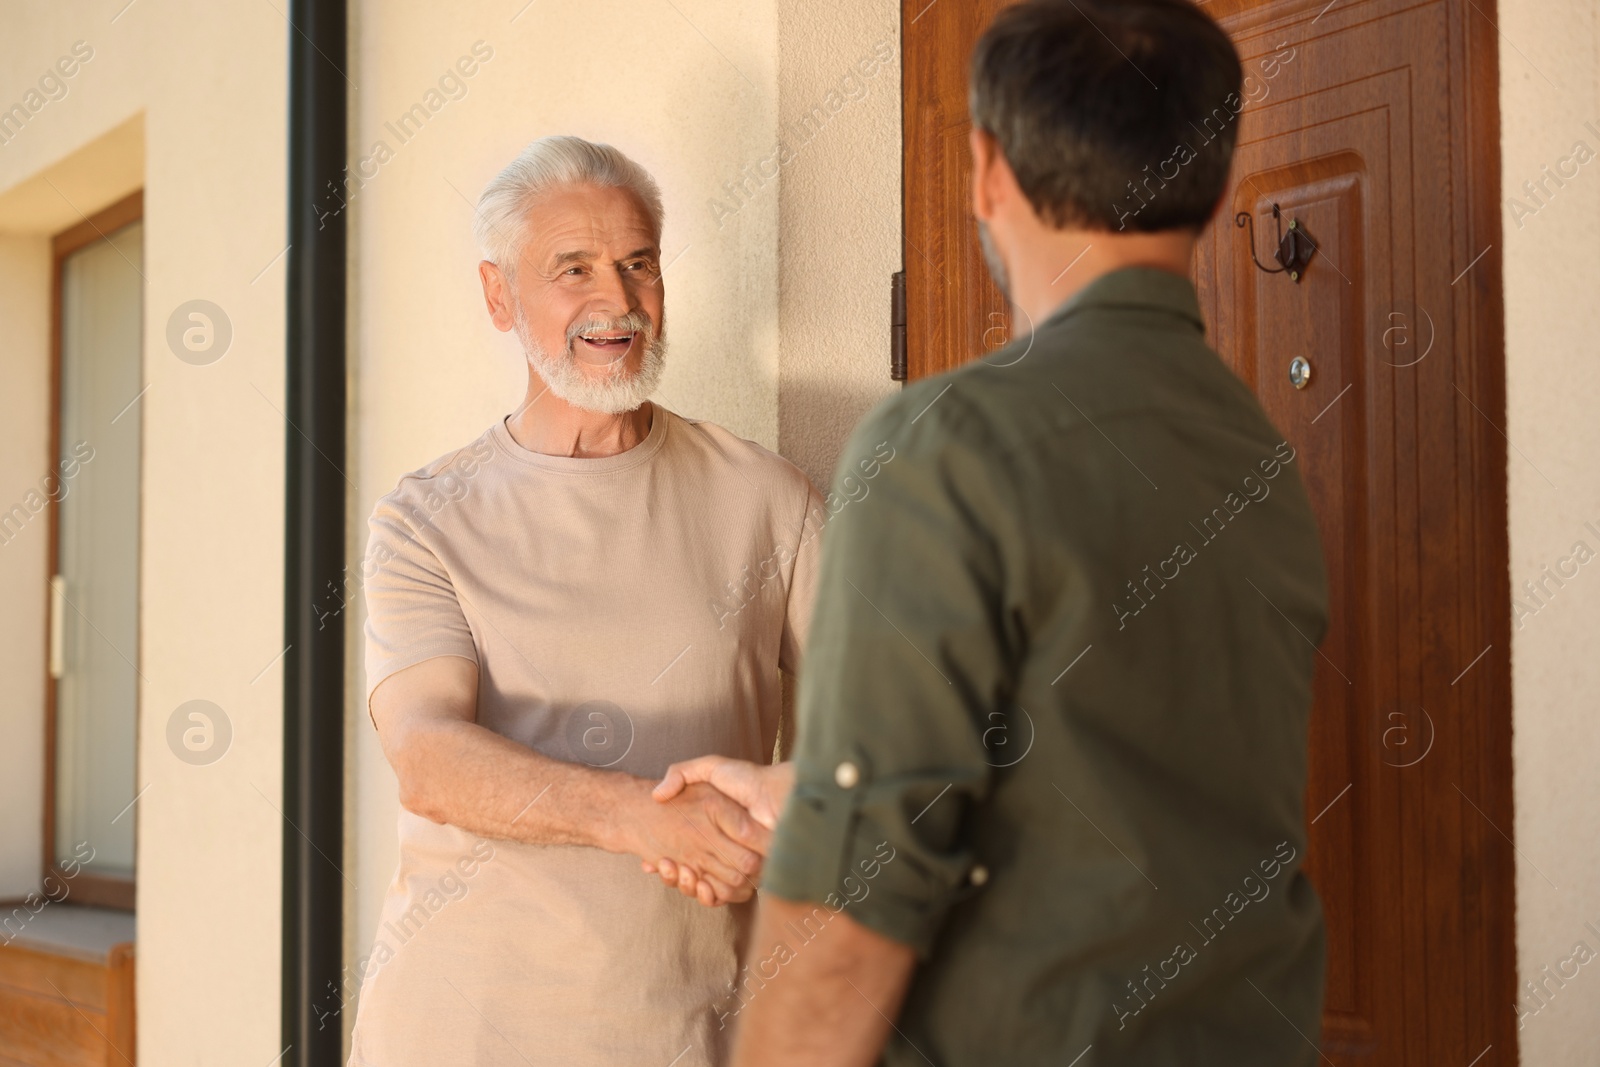 Photo of Friendly relationship with neighbours. Happy men shaking hands near house outdoors